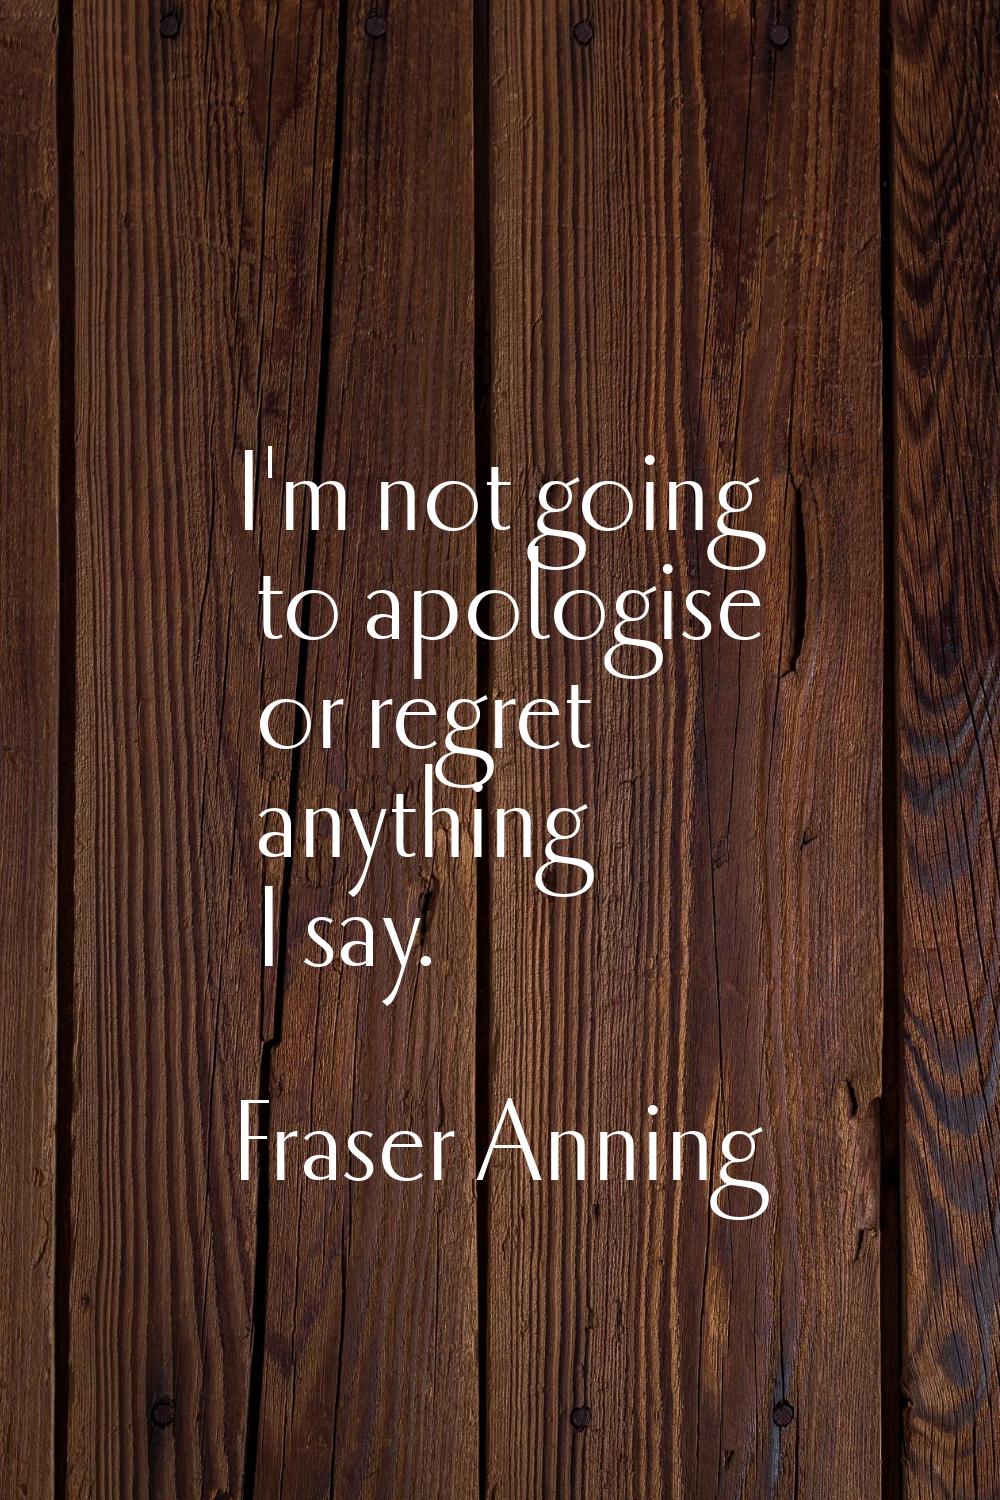 I'm not going to apologise or regret anything I say.